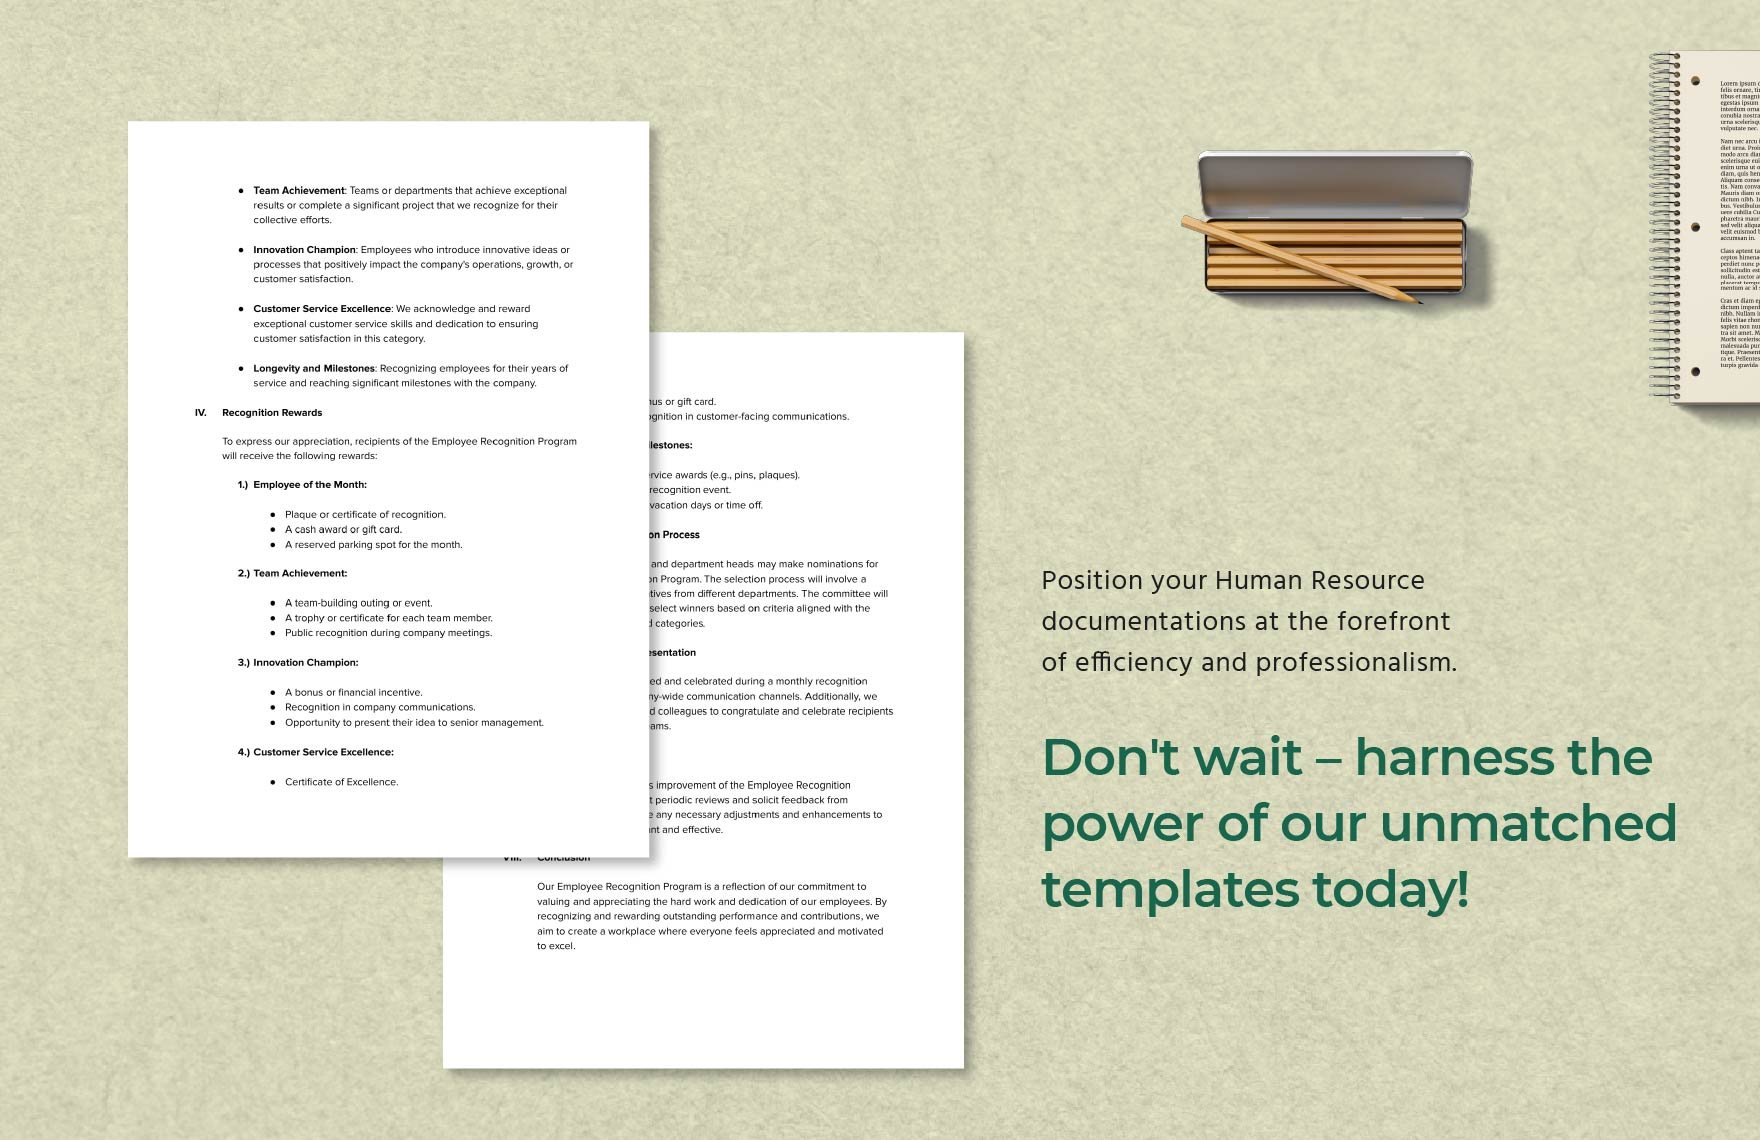 Employee Recognition Program HR Template